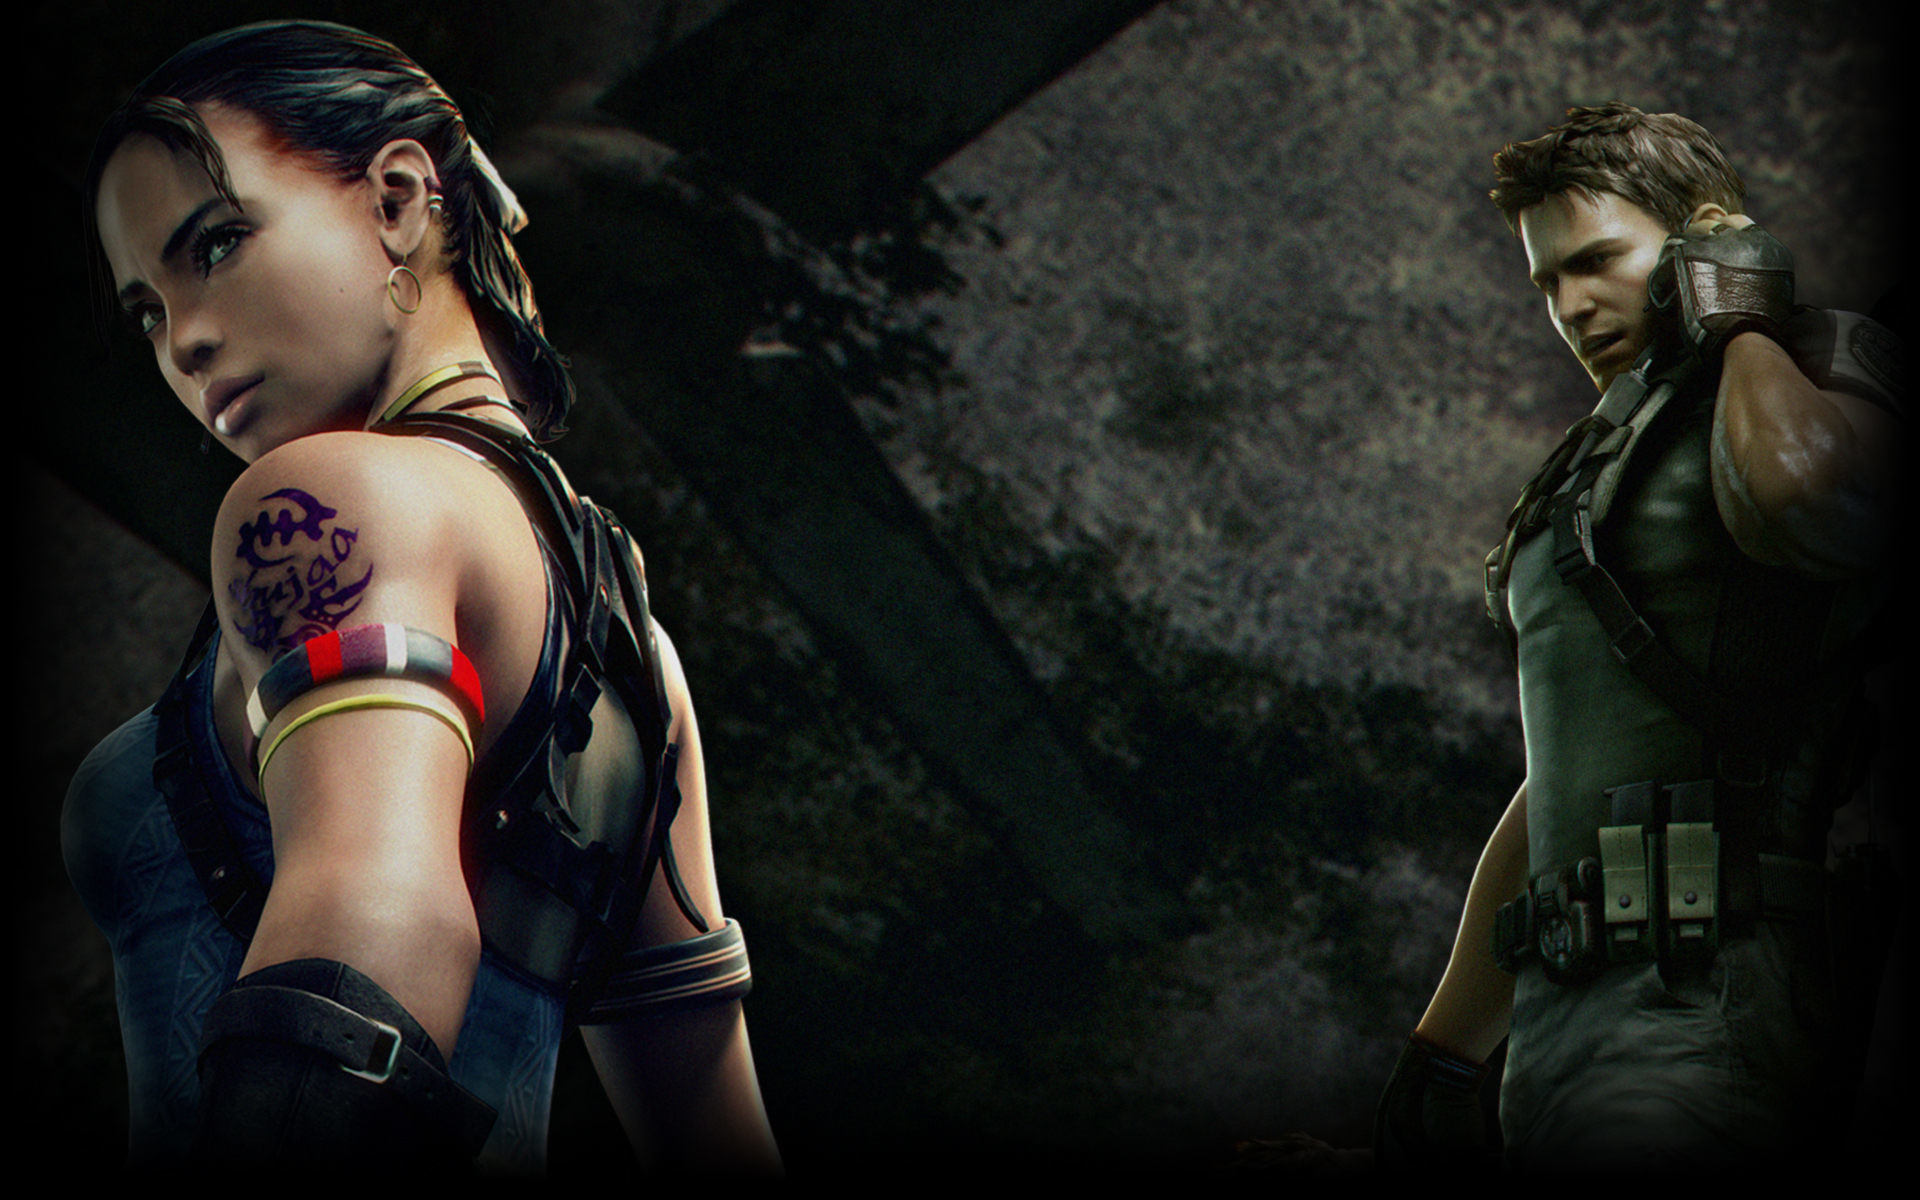 1920x1200 Resident Evil 5 images Chris and Sheva HD wallpaper and background photos